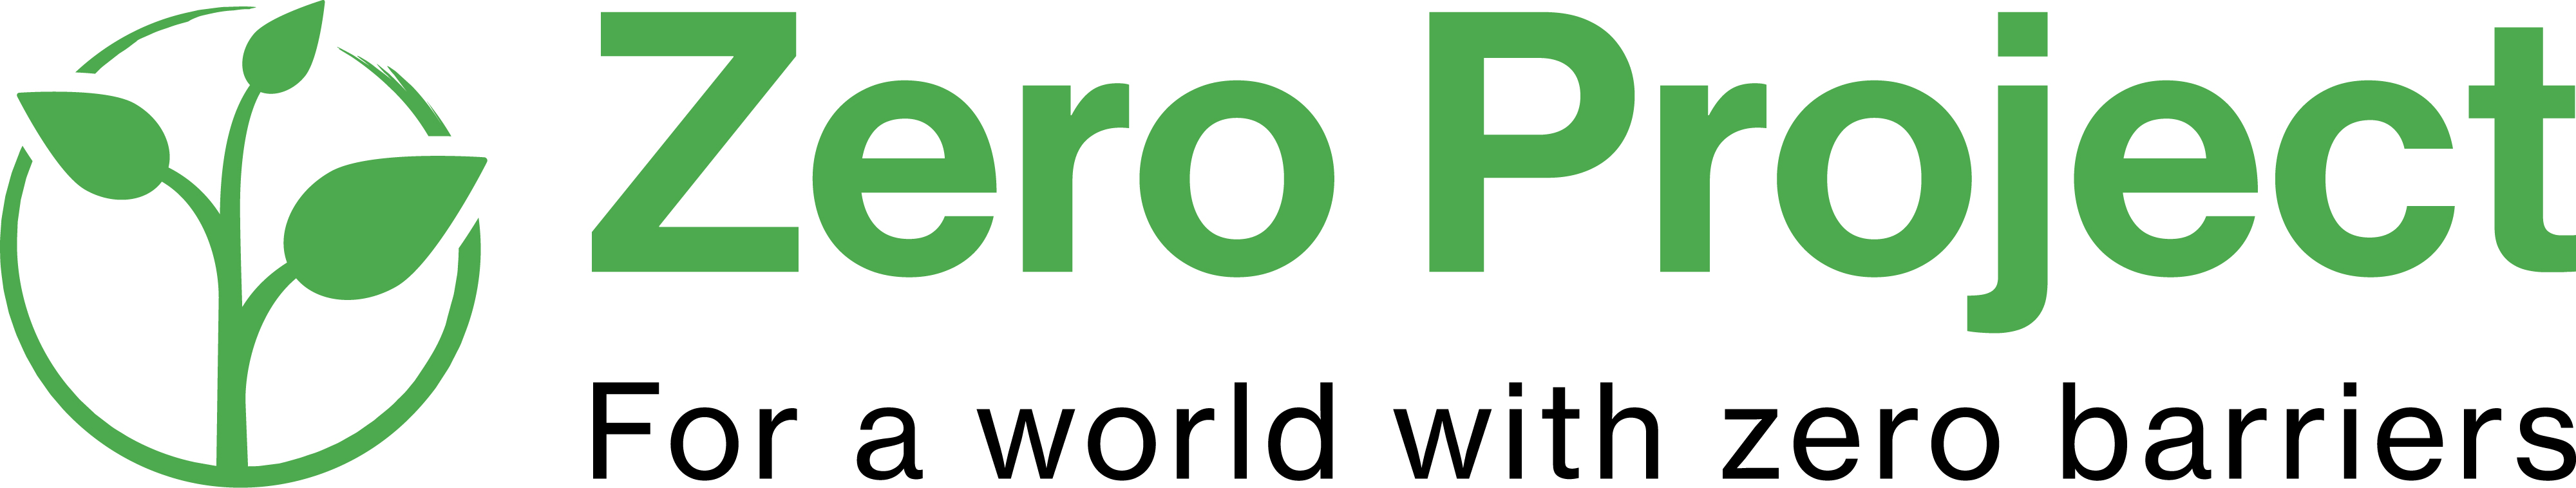 Zero Project logo: For a world without barrriers